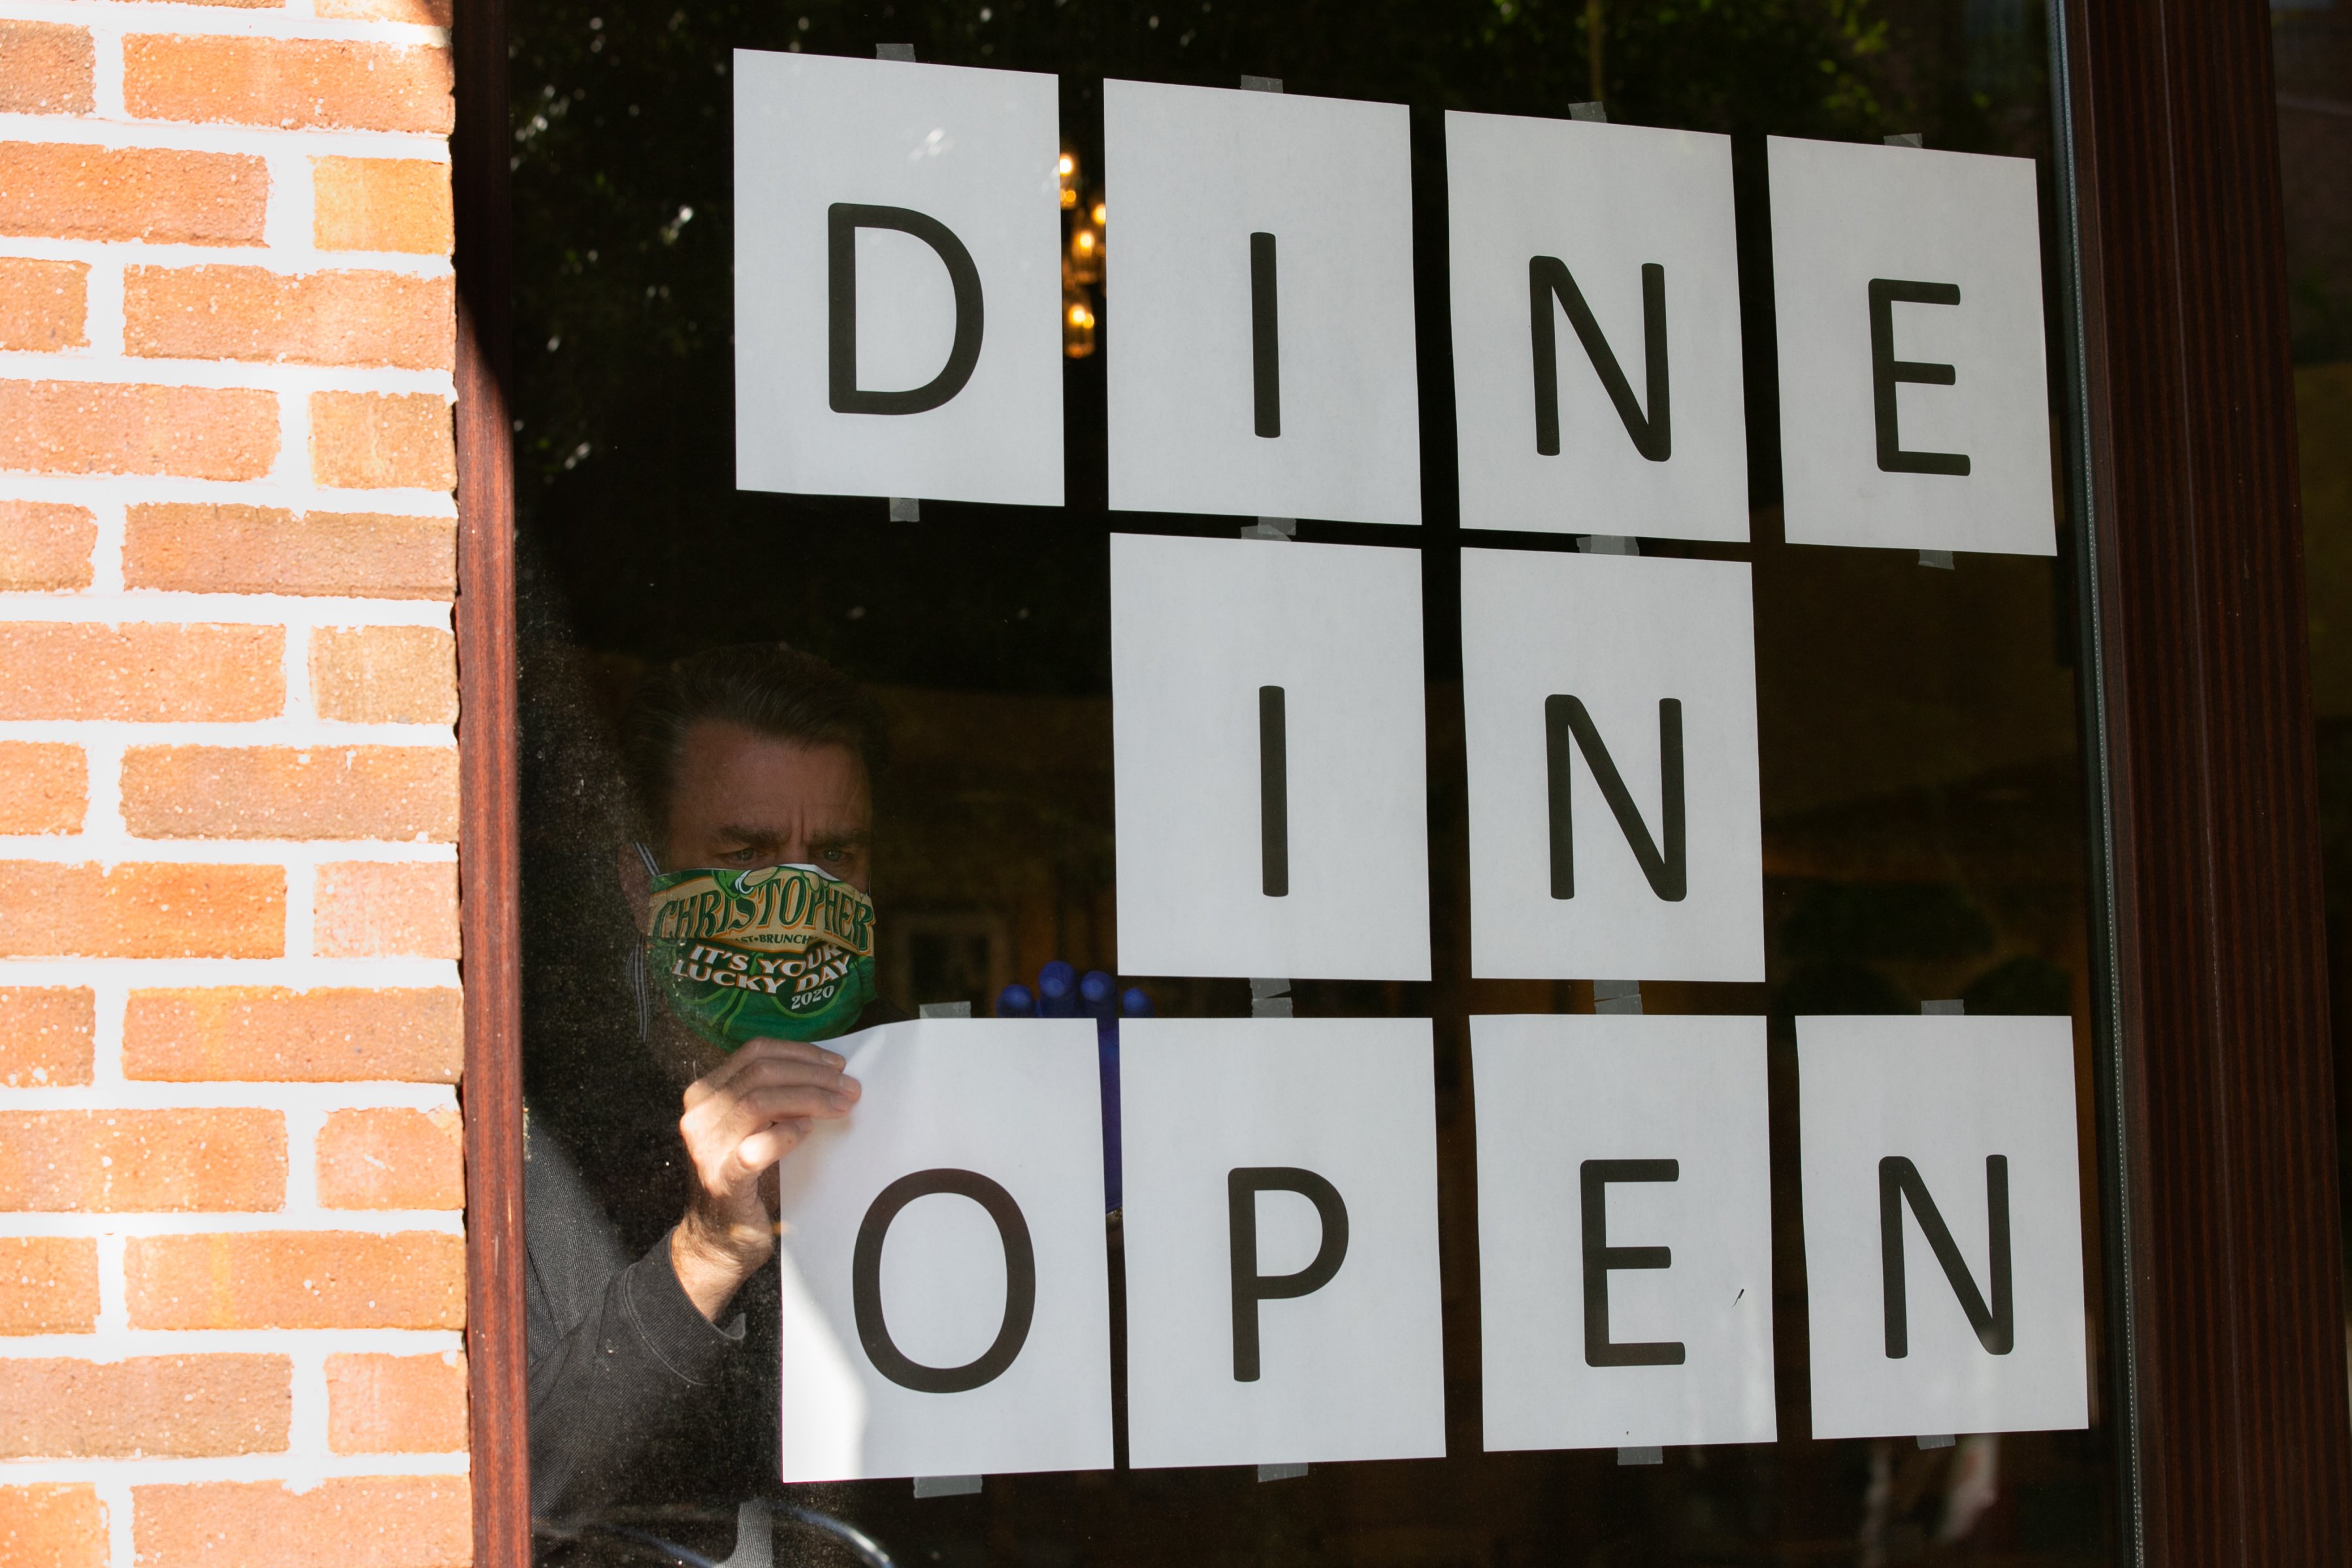 Barry Lennon, Operating Partner of J. Christopher, hangs up signs to to promote dine in service now available in the J. Christopher restaurant on April 27, 2020 in Brookhaven, Georgia. (Photo by Jessica McGowan/Getty Images)